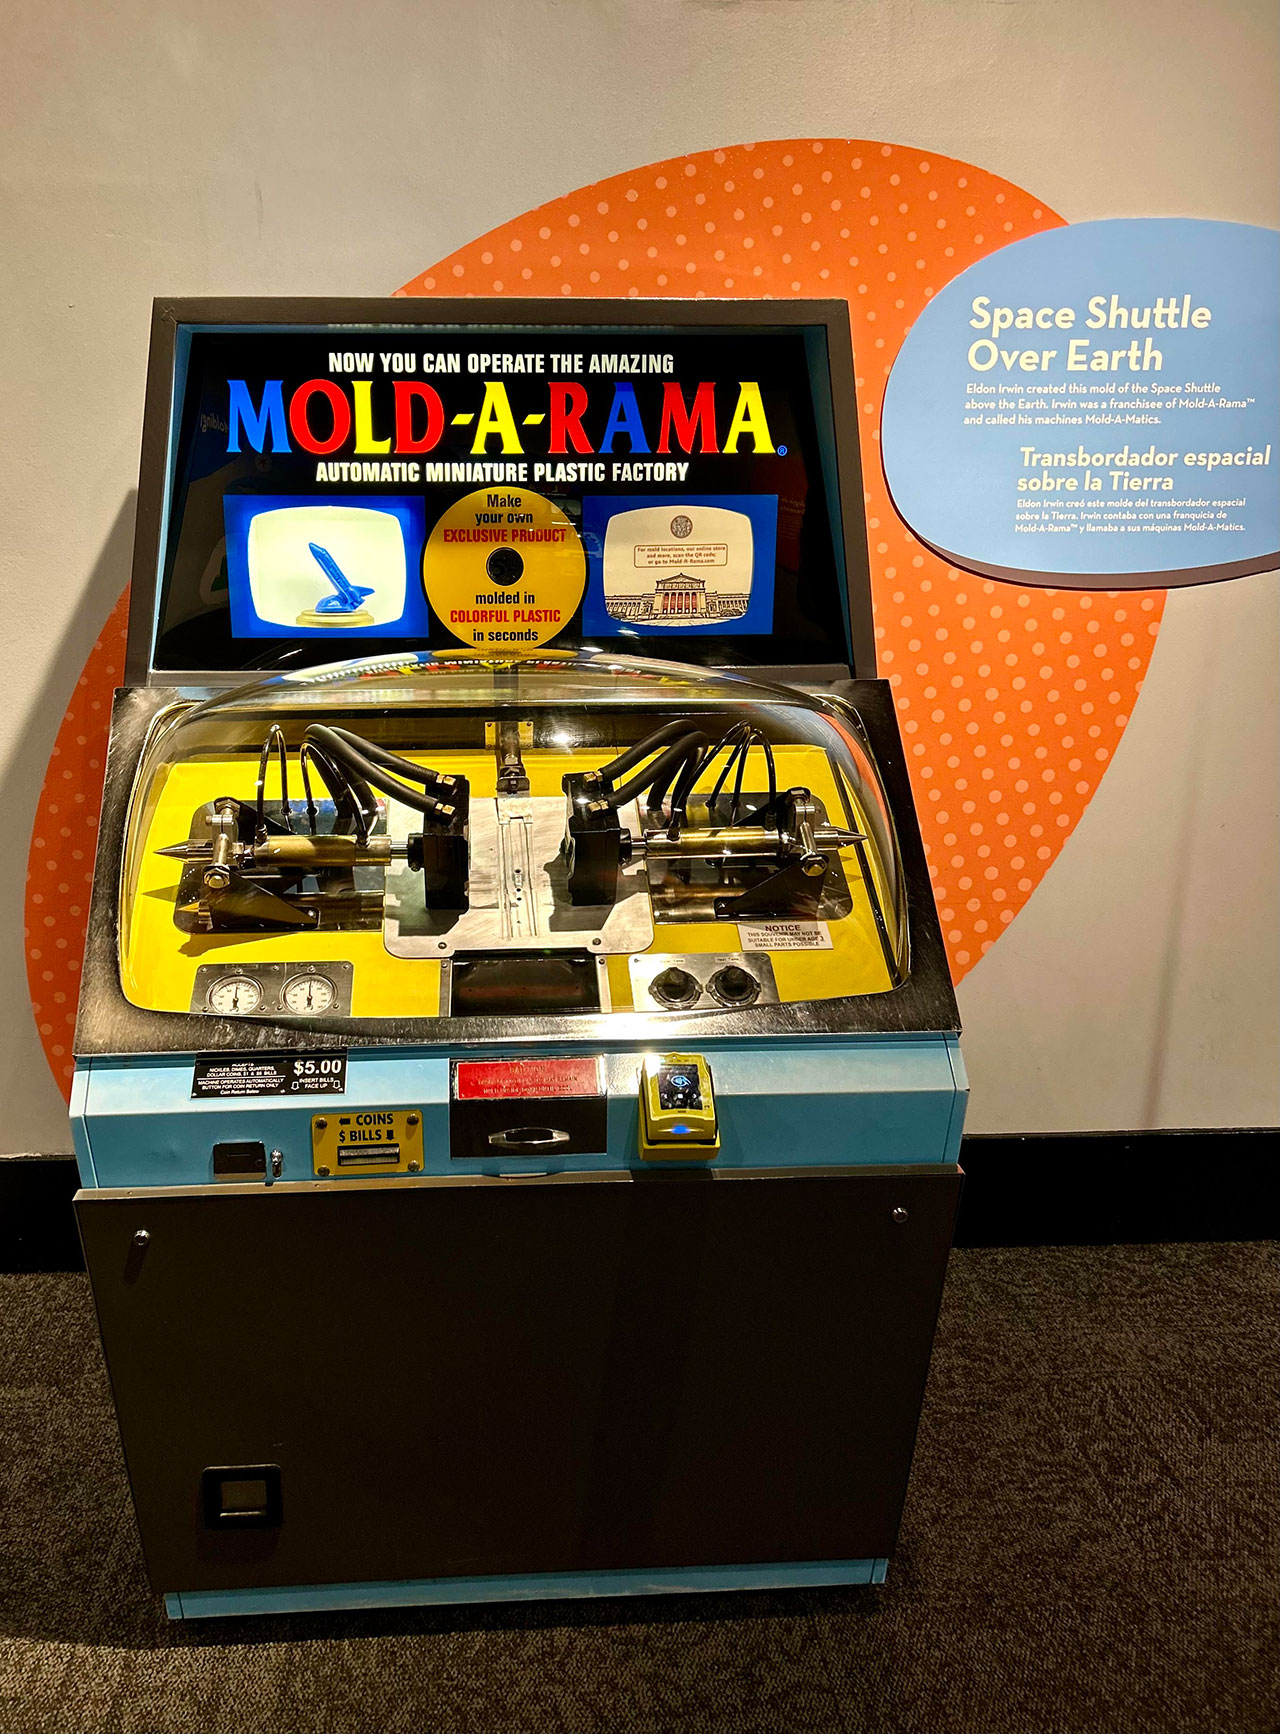 A Mold-A-Rama machine with the space shuttle over Earth mold is seen at the Museum of Science & Industry in Chicago as part of the exhibit, 